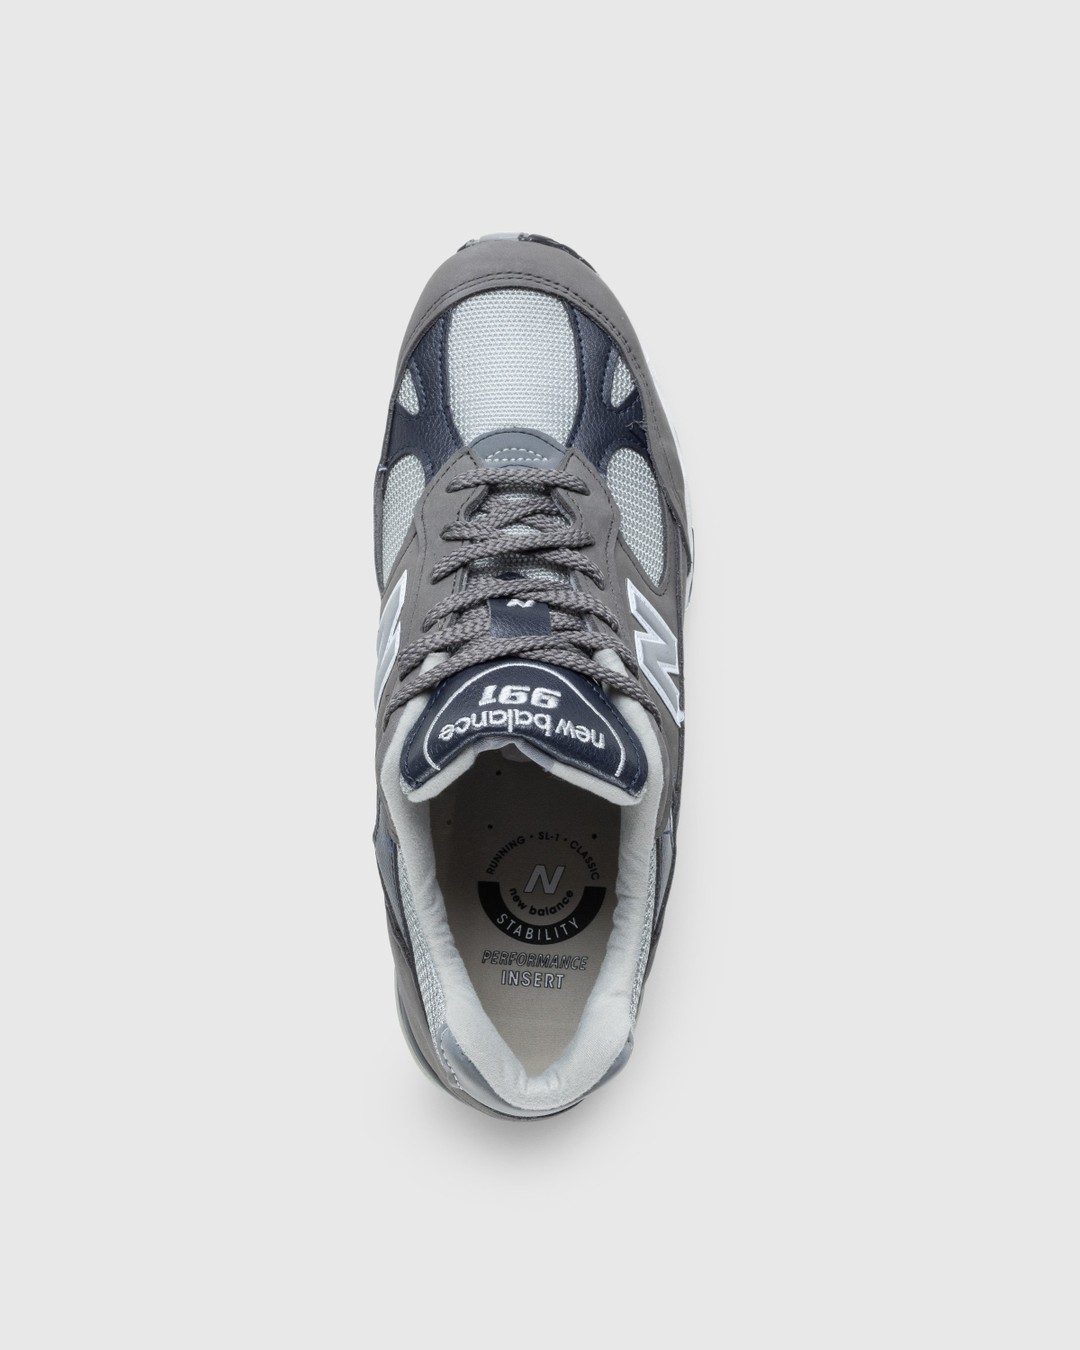 New Balance – M991GNS Grey/Navy - Sneakers - Grey - Image 5